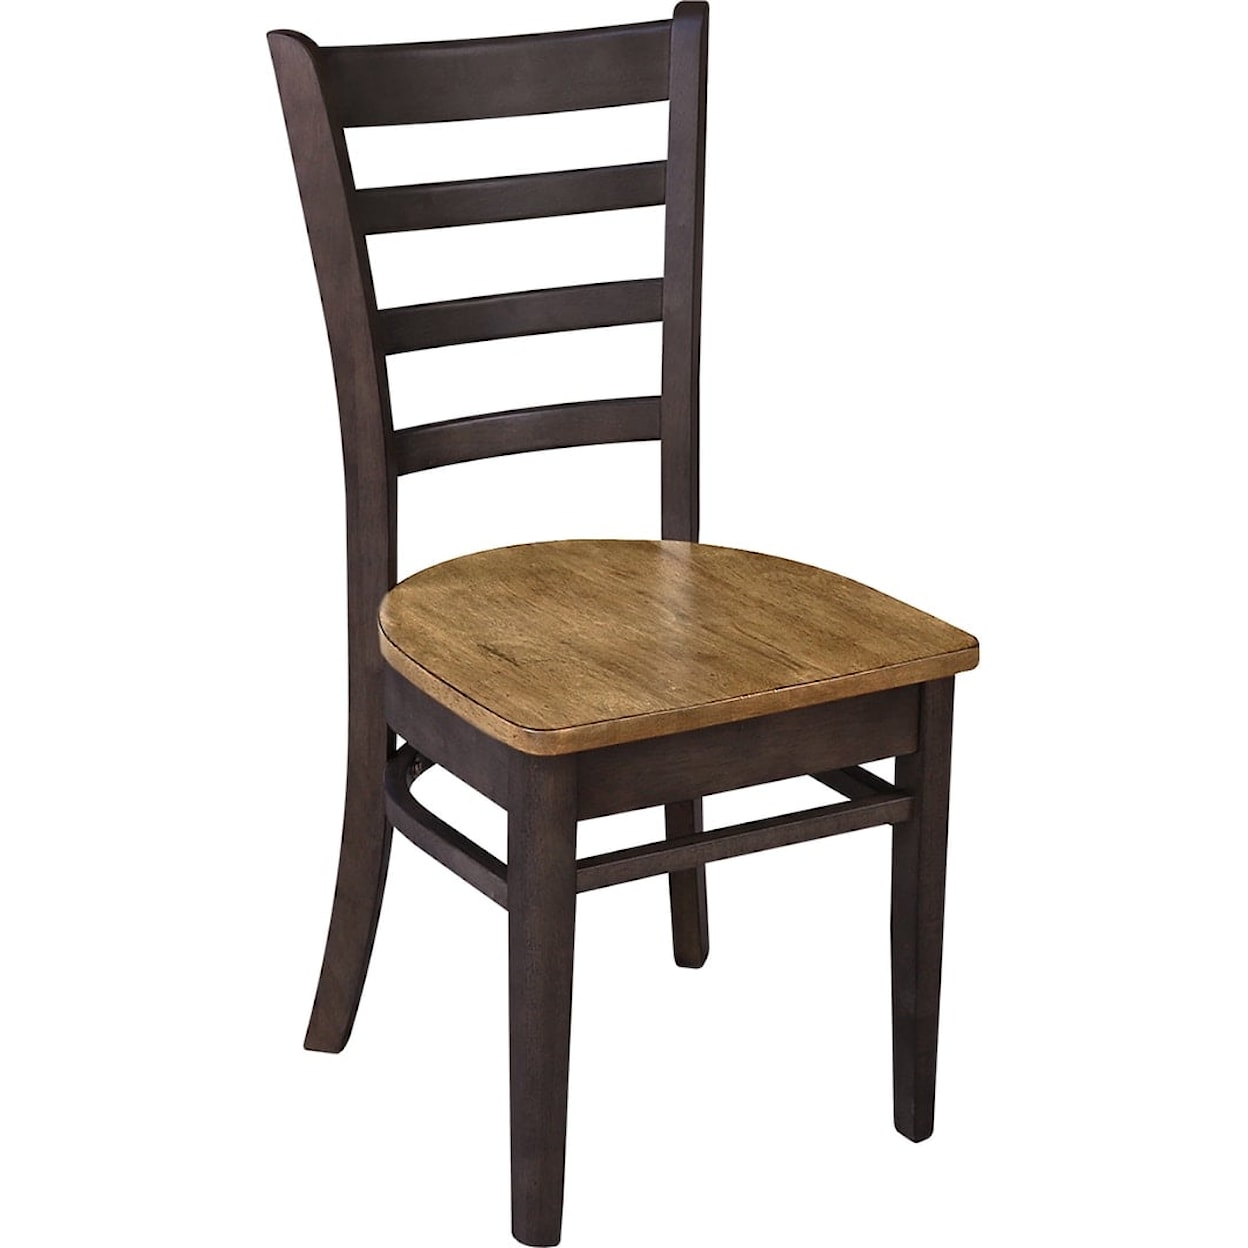 John Thomas Dining Essentials Emily Chair in Hickory/Coal